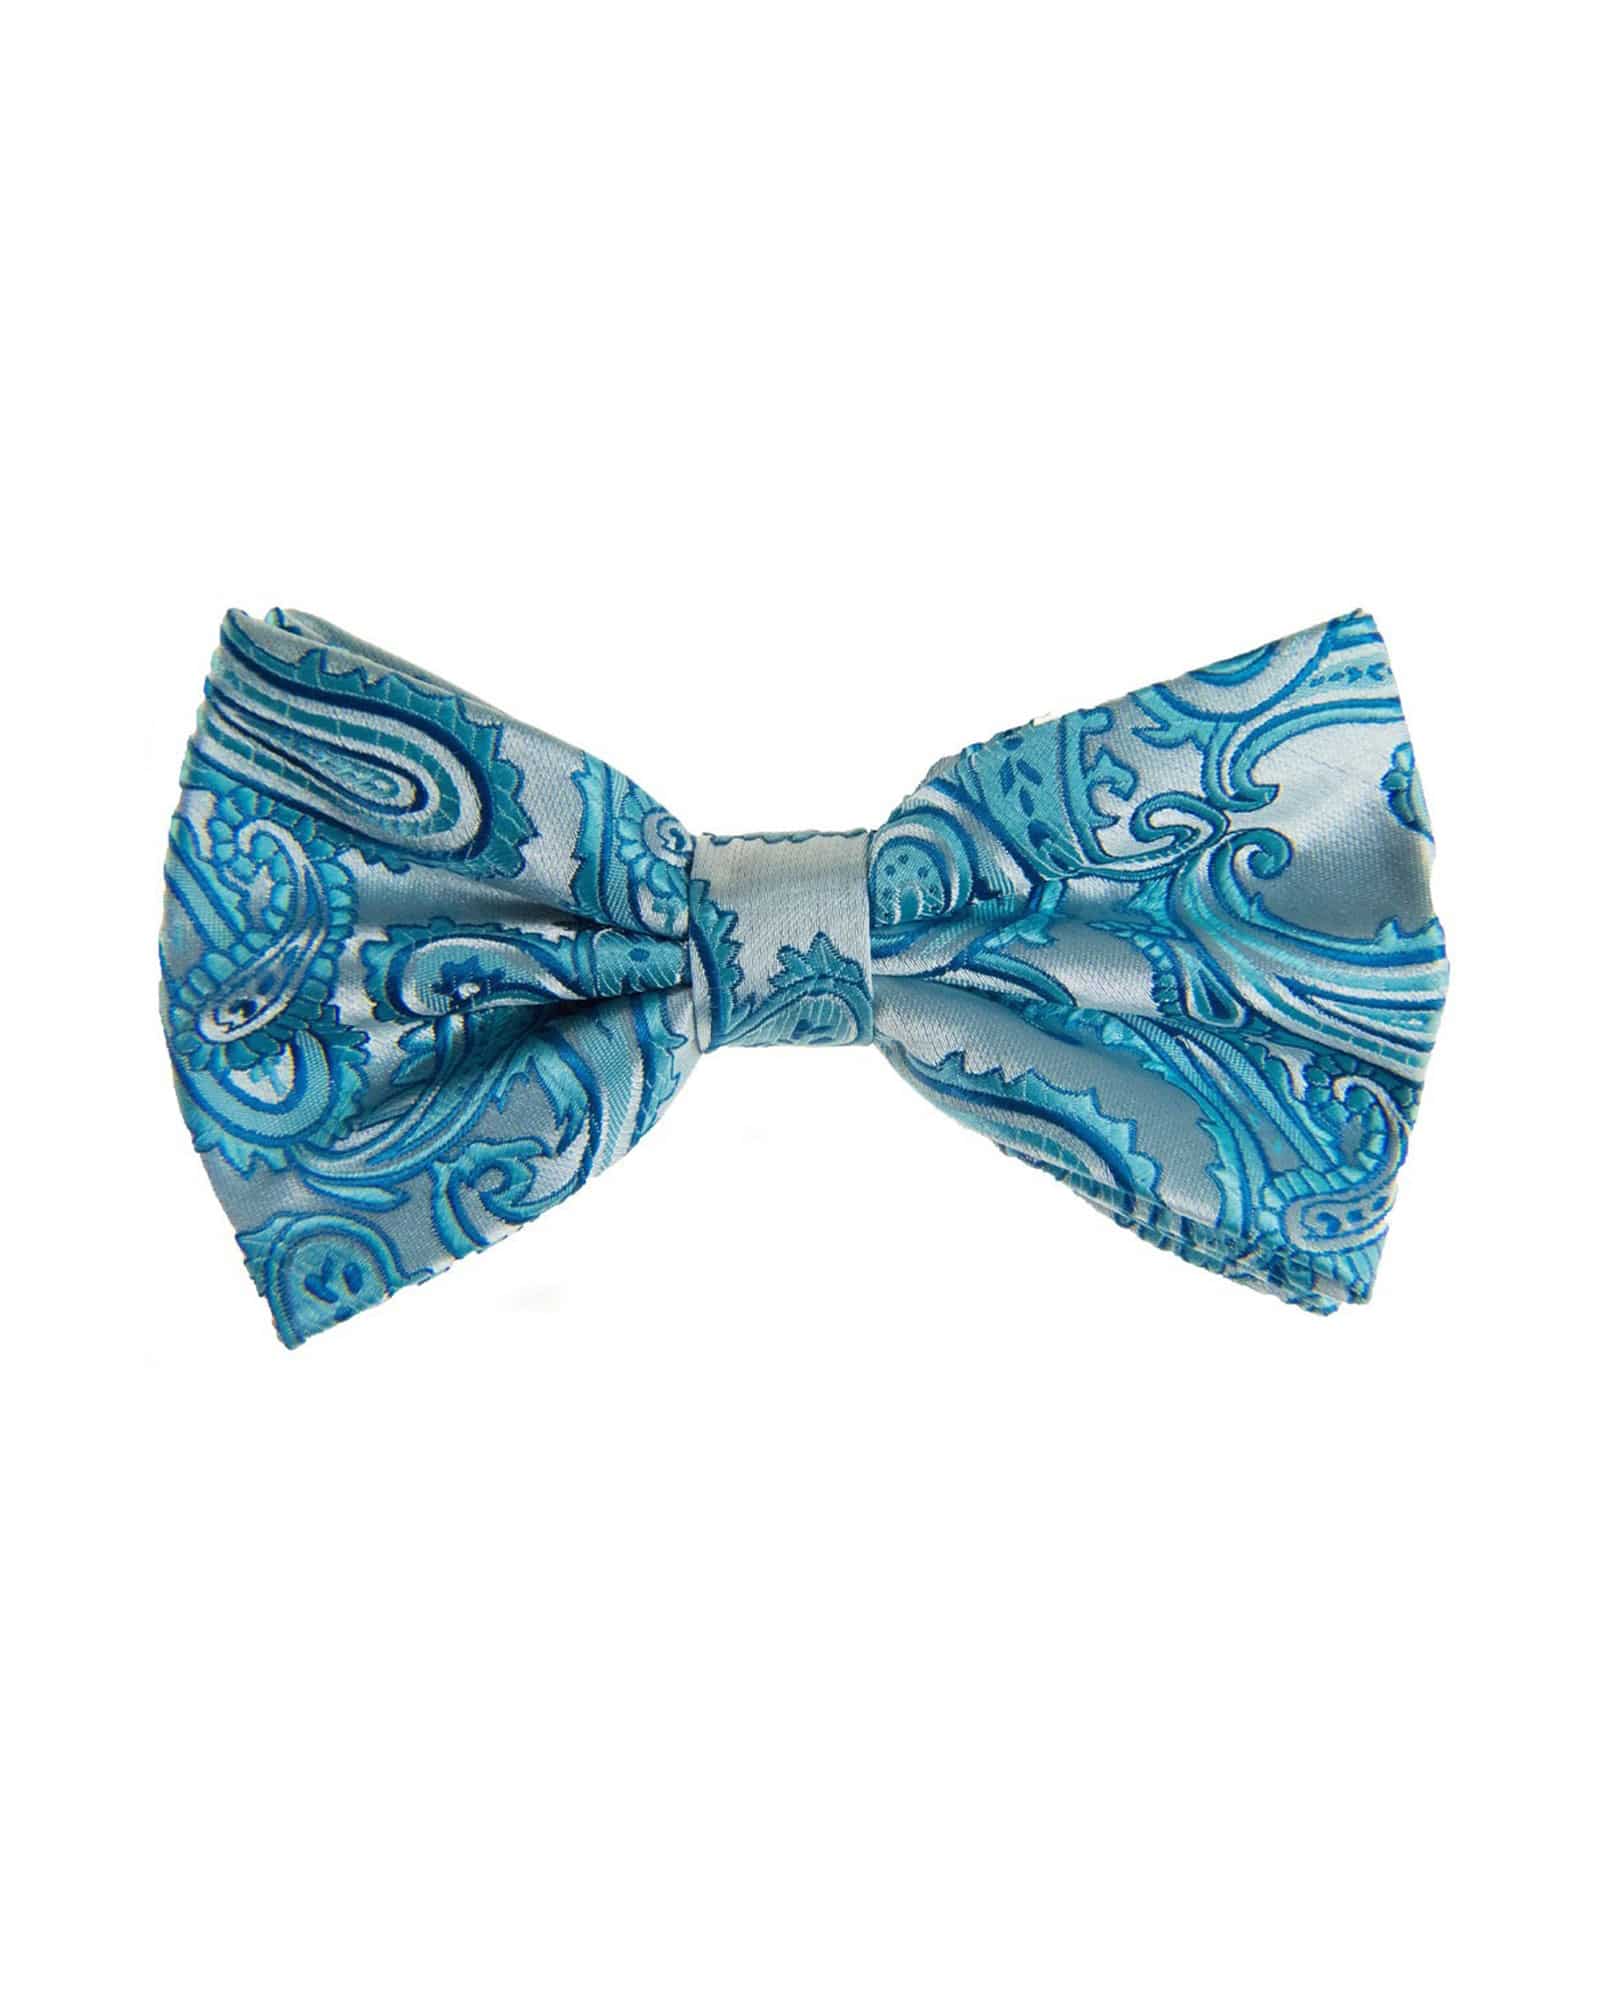 Bow Tie In Paisley Pattern Light Blue - Rainwater's Men's Clothing and Tuxedo Rental